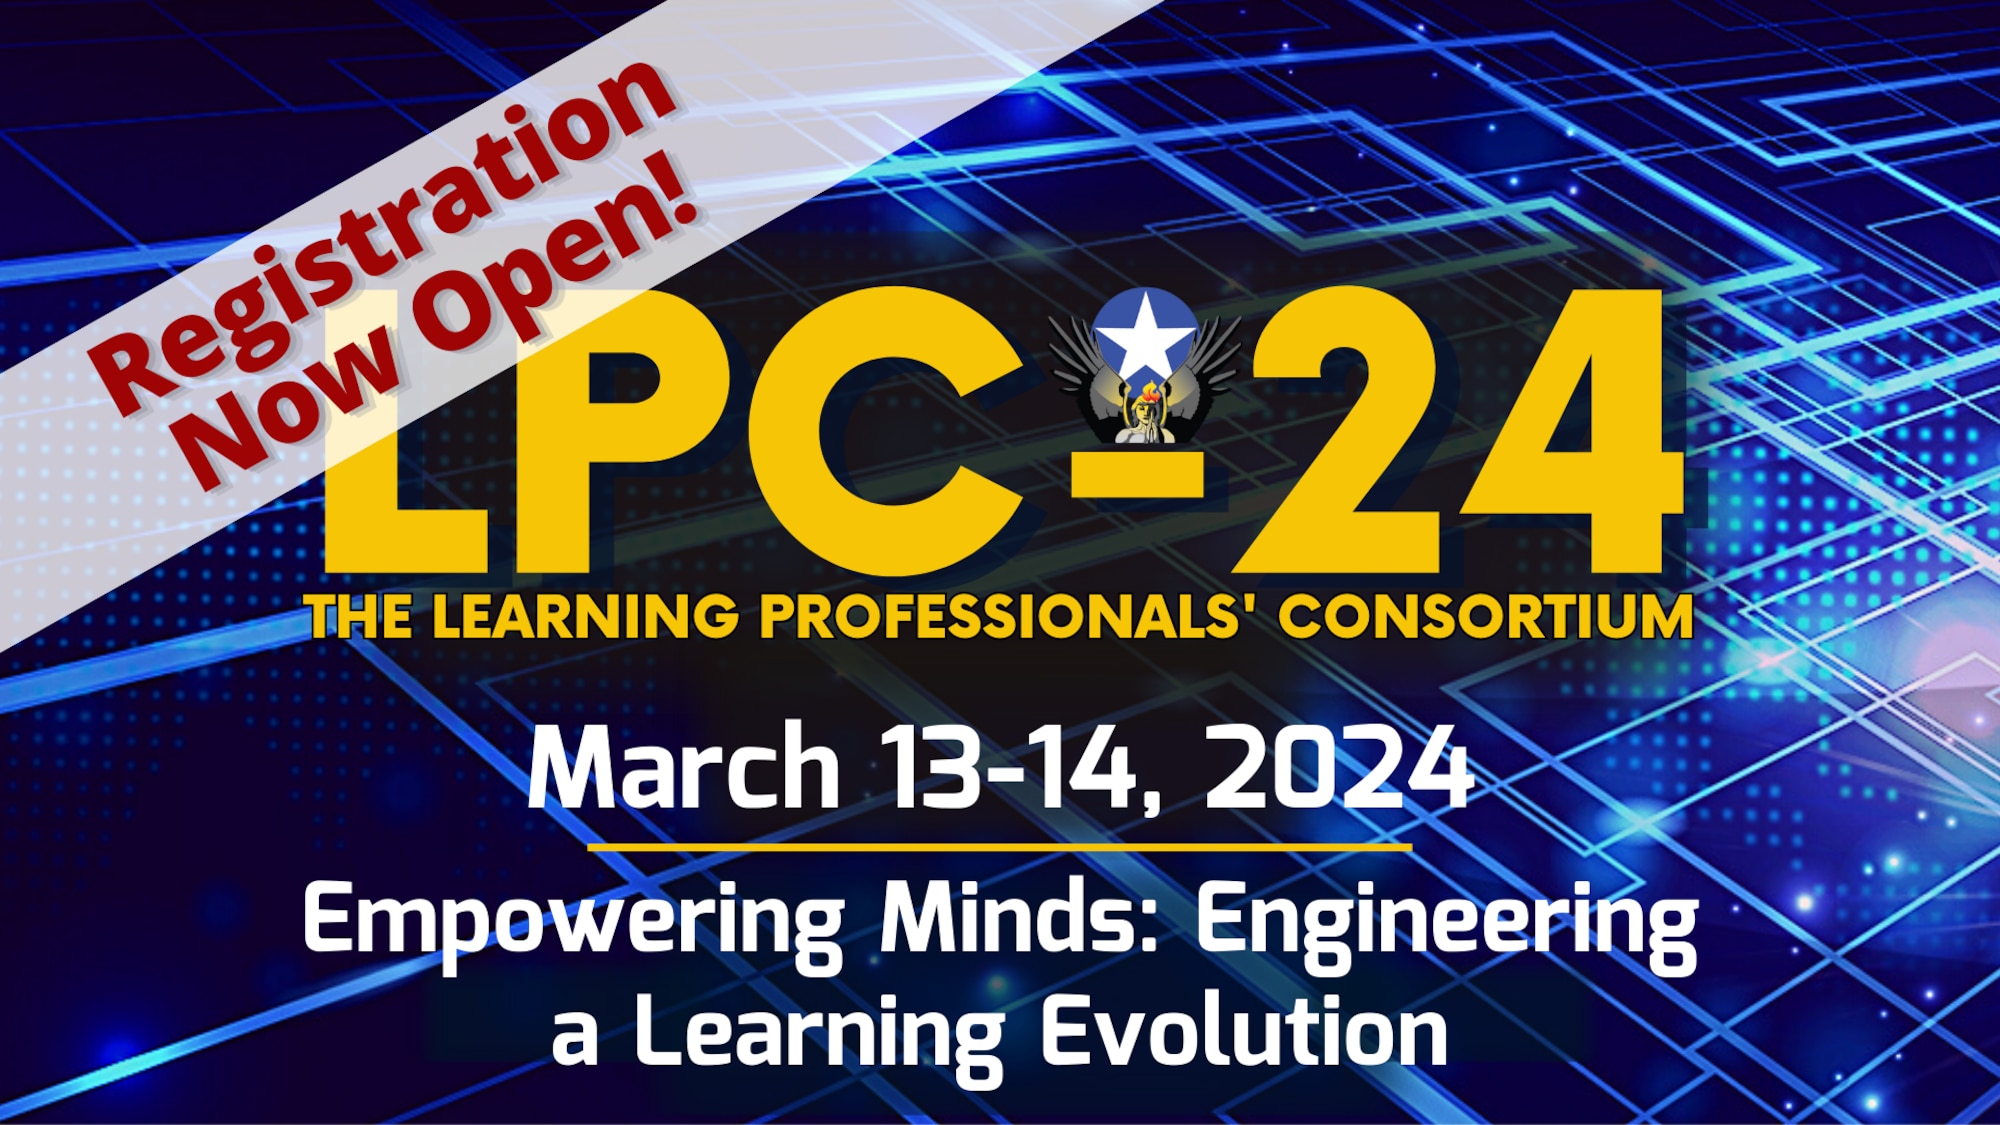 LPC-24 Learning Professionals' Consortium Registration Now Open March 13-14, 2024 Empowering Minds: Engineering a Learning Evolution